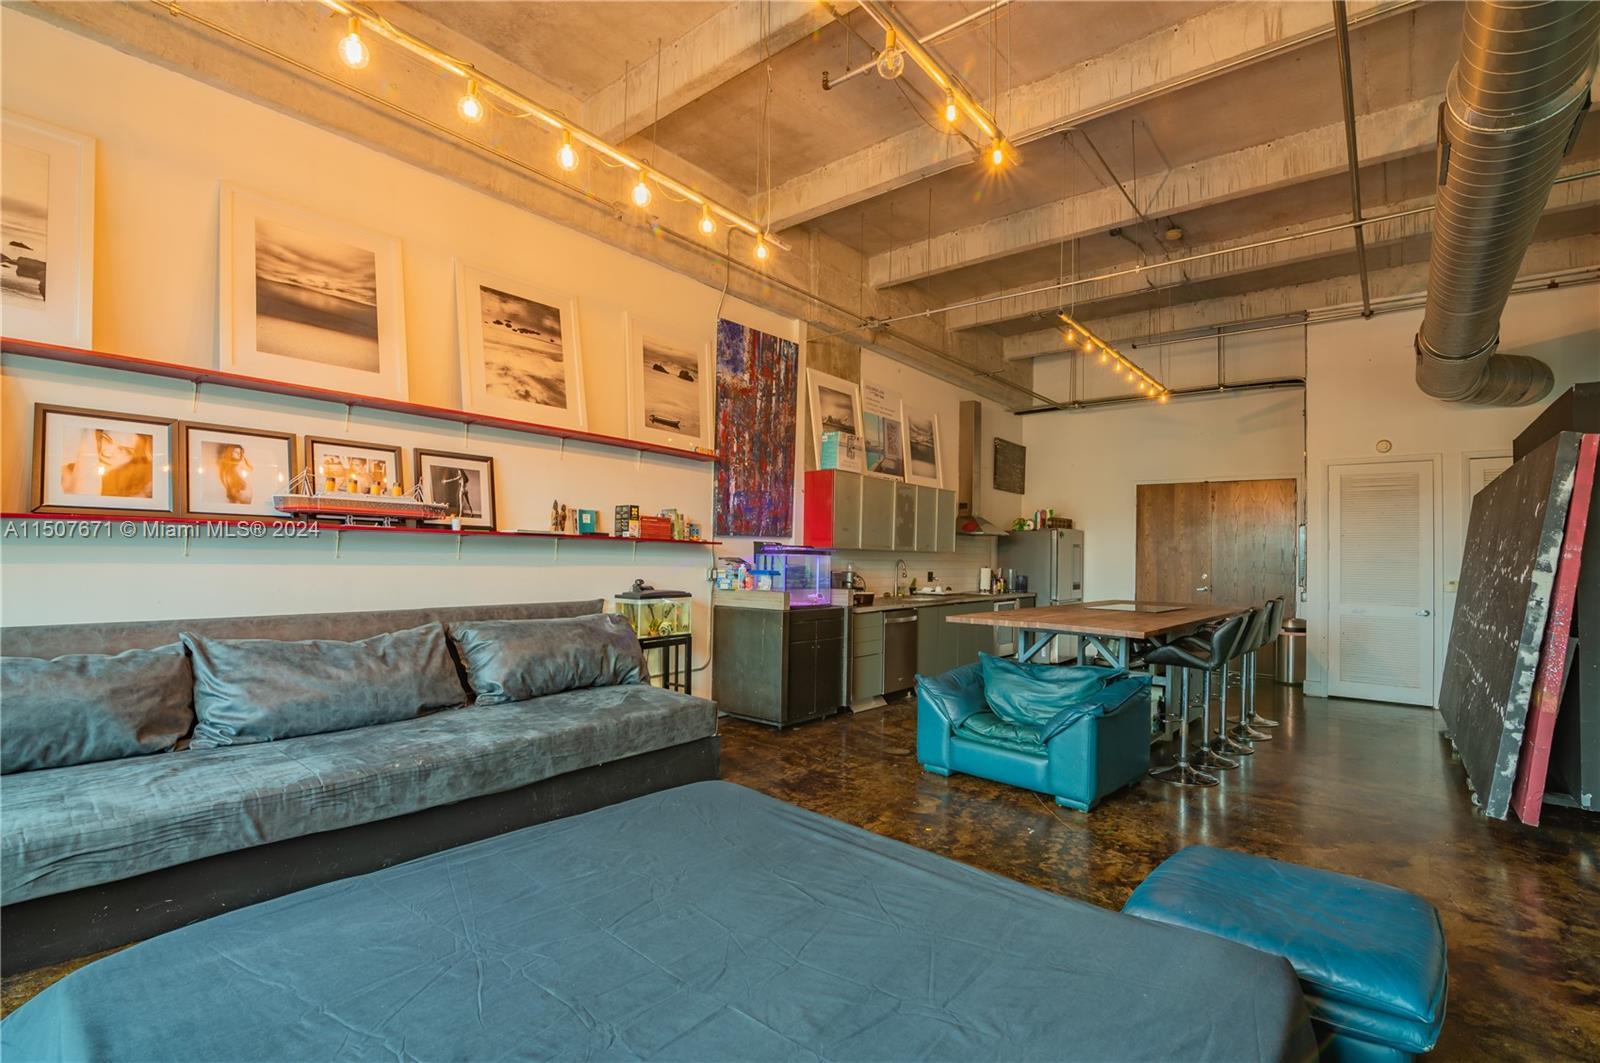 Gorgeous NY Style Industrial Loft with lots of charm! Soaring 20' celings with lots of storage! All 